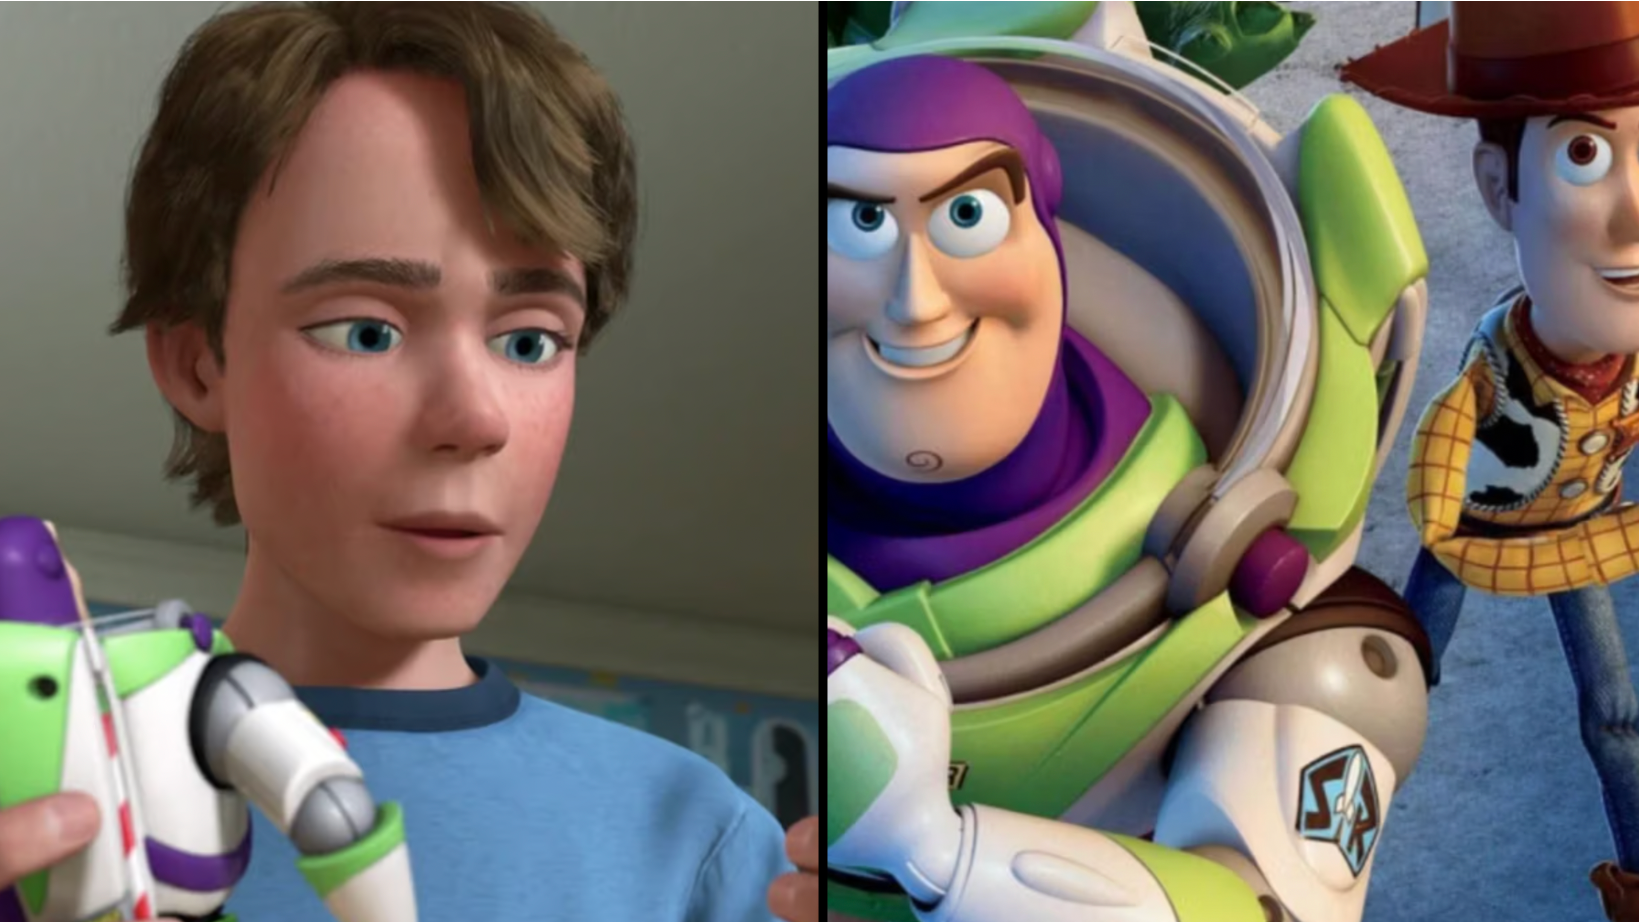 Toy Story 5 bringing back Andy, because apparently Toy Story 3 means  nothing to Disney